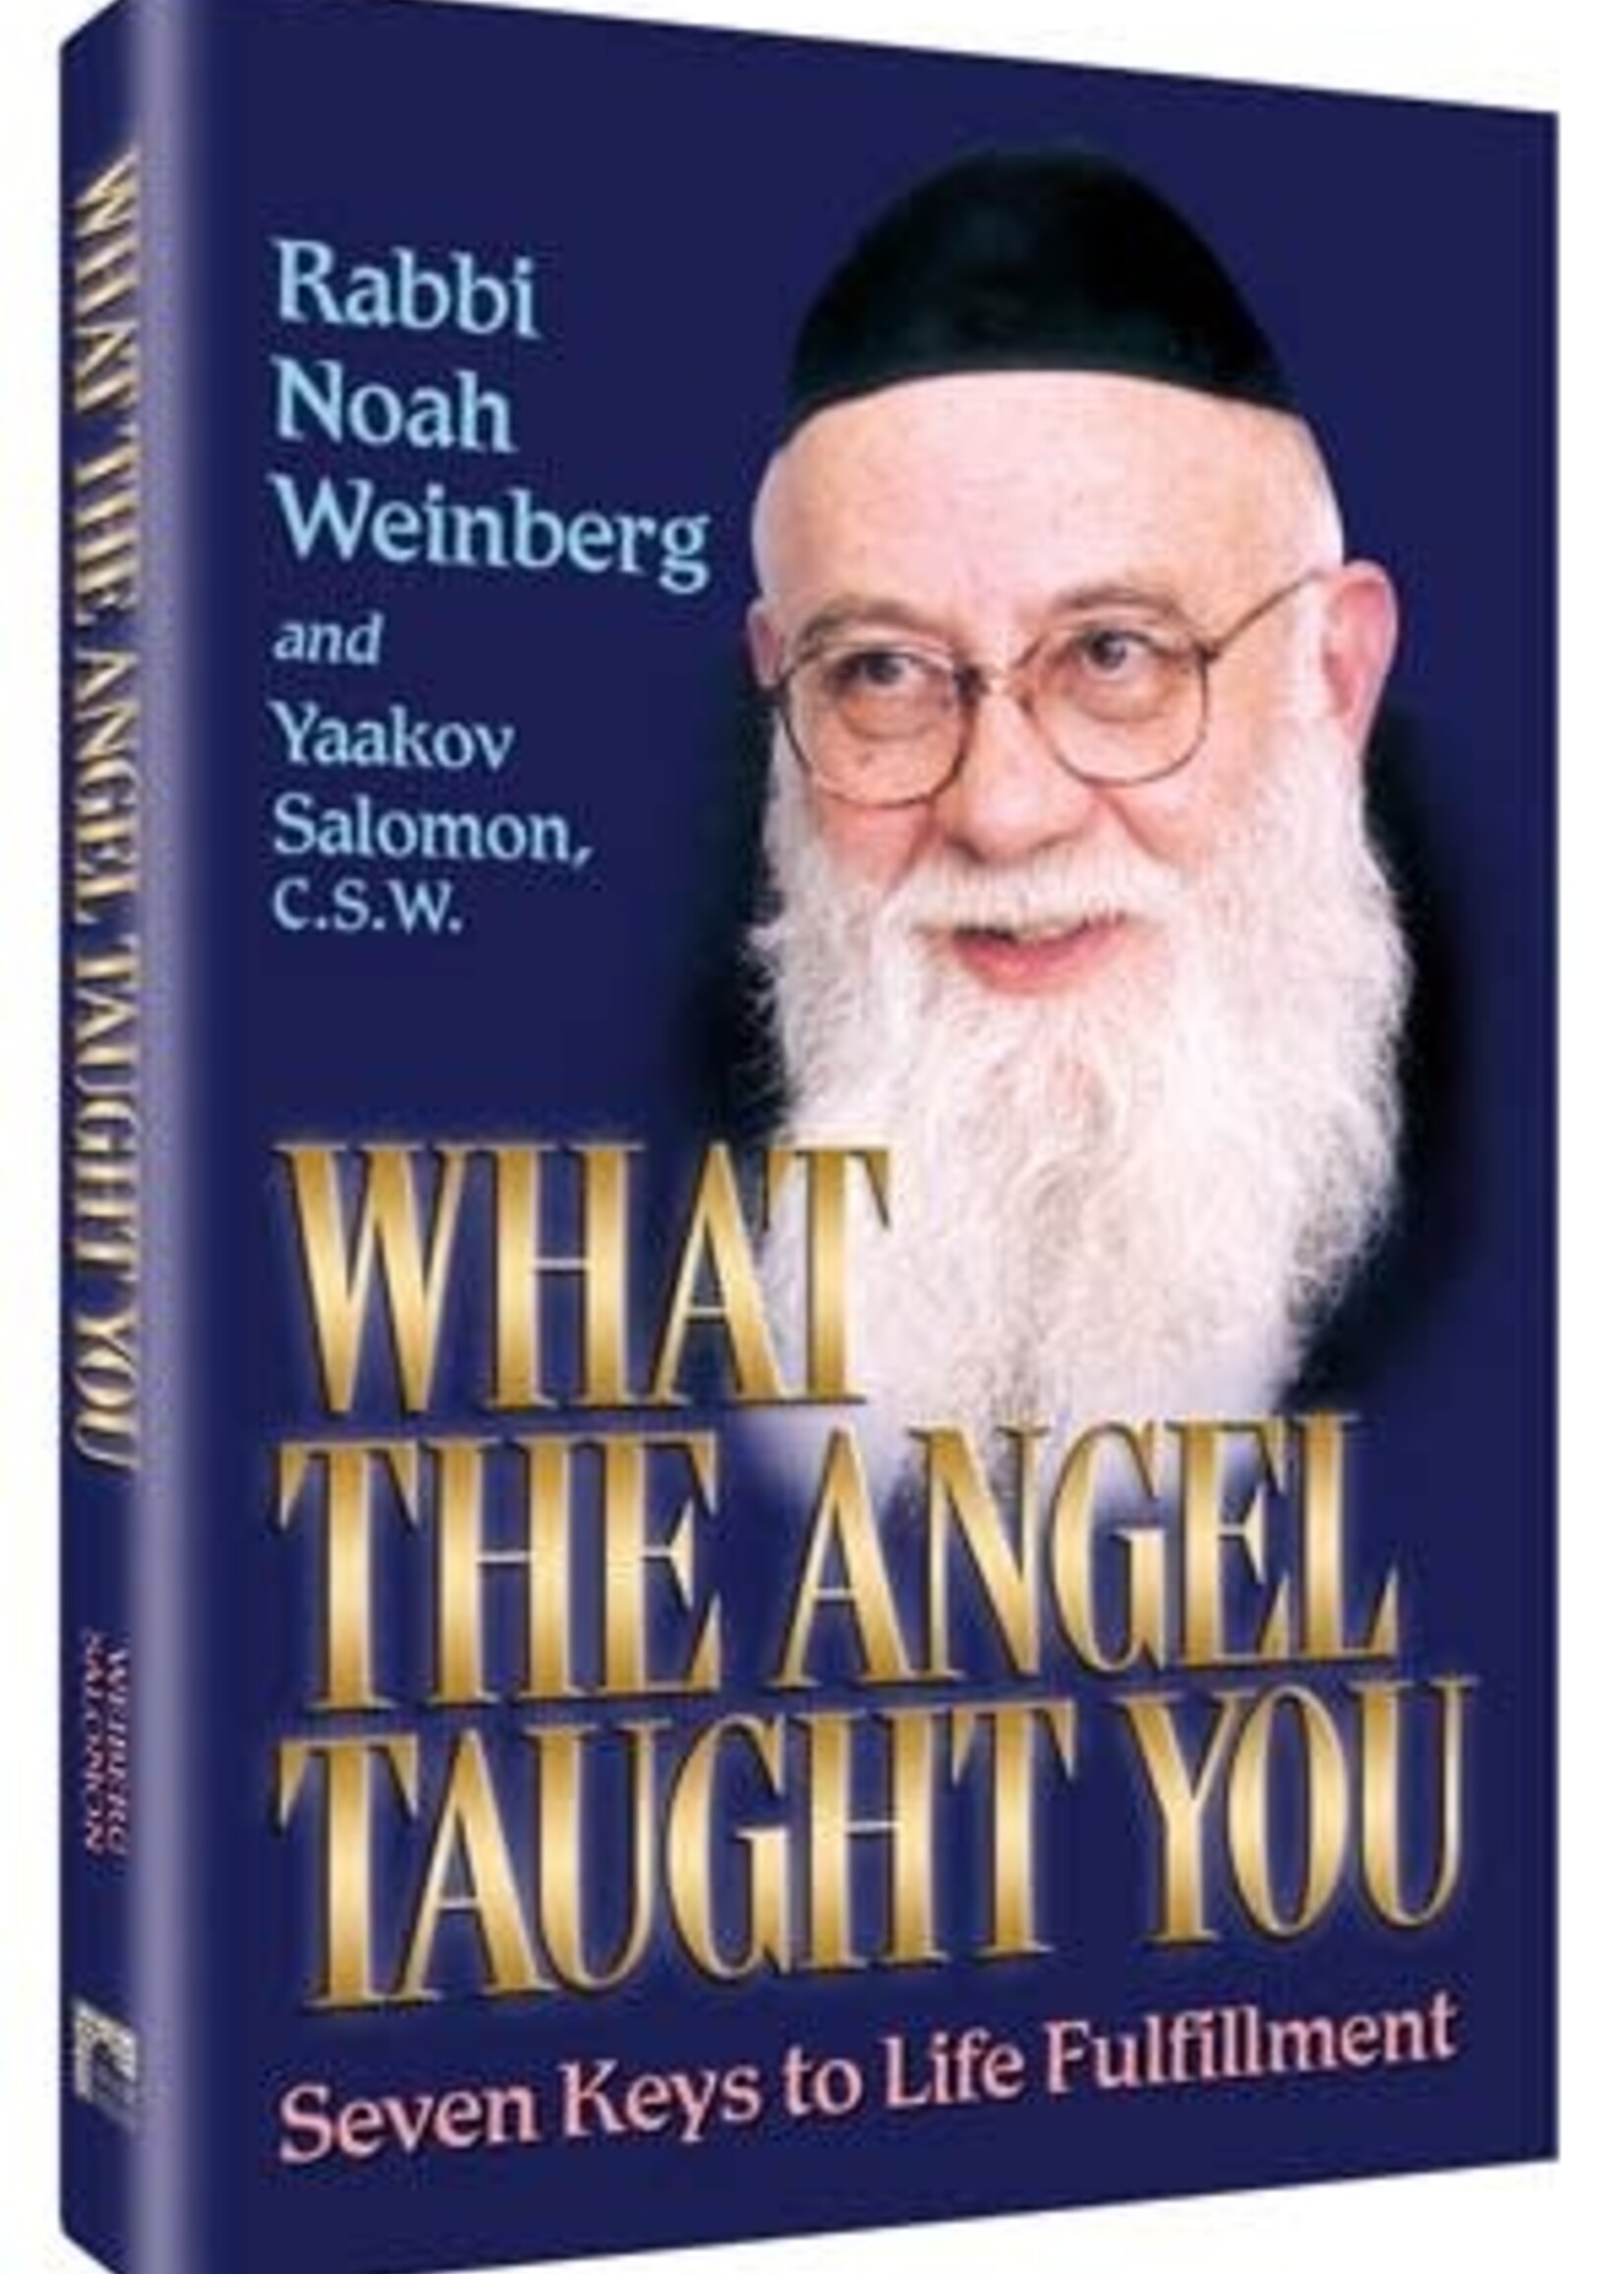 Rabbi Noach Weinberg What the Angel Taught You